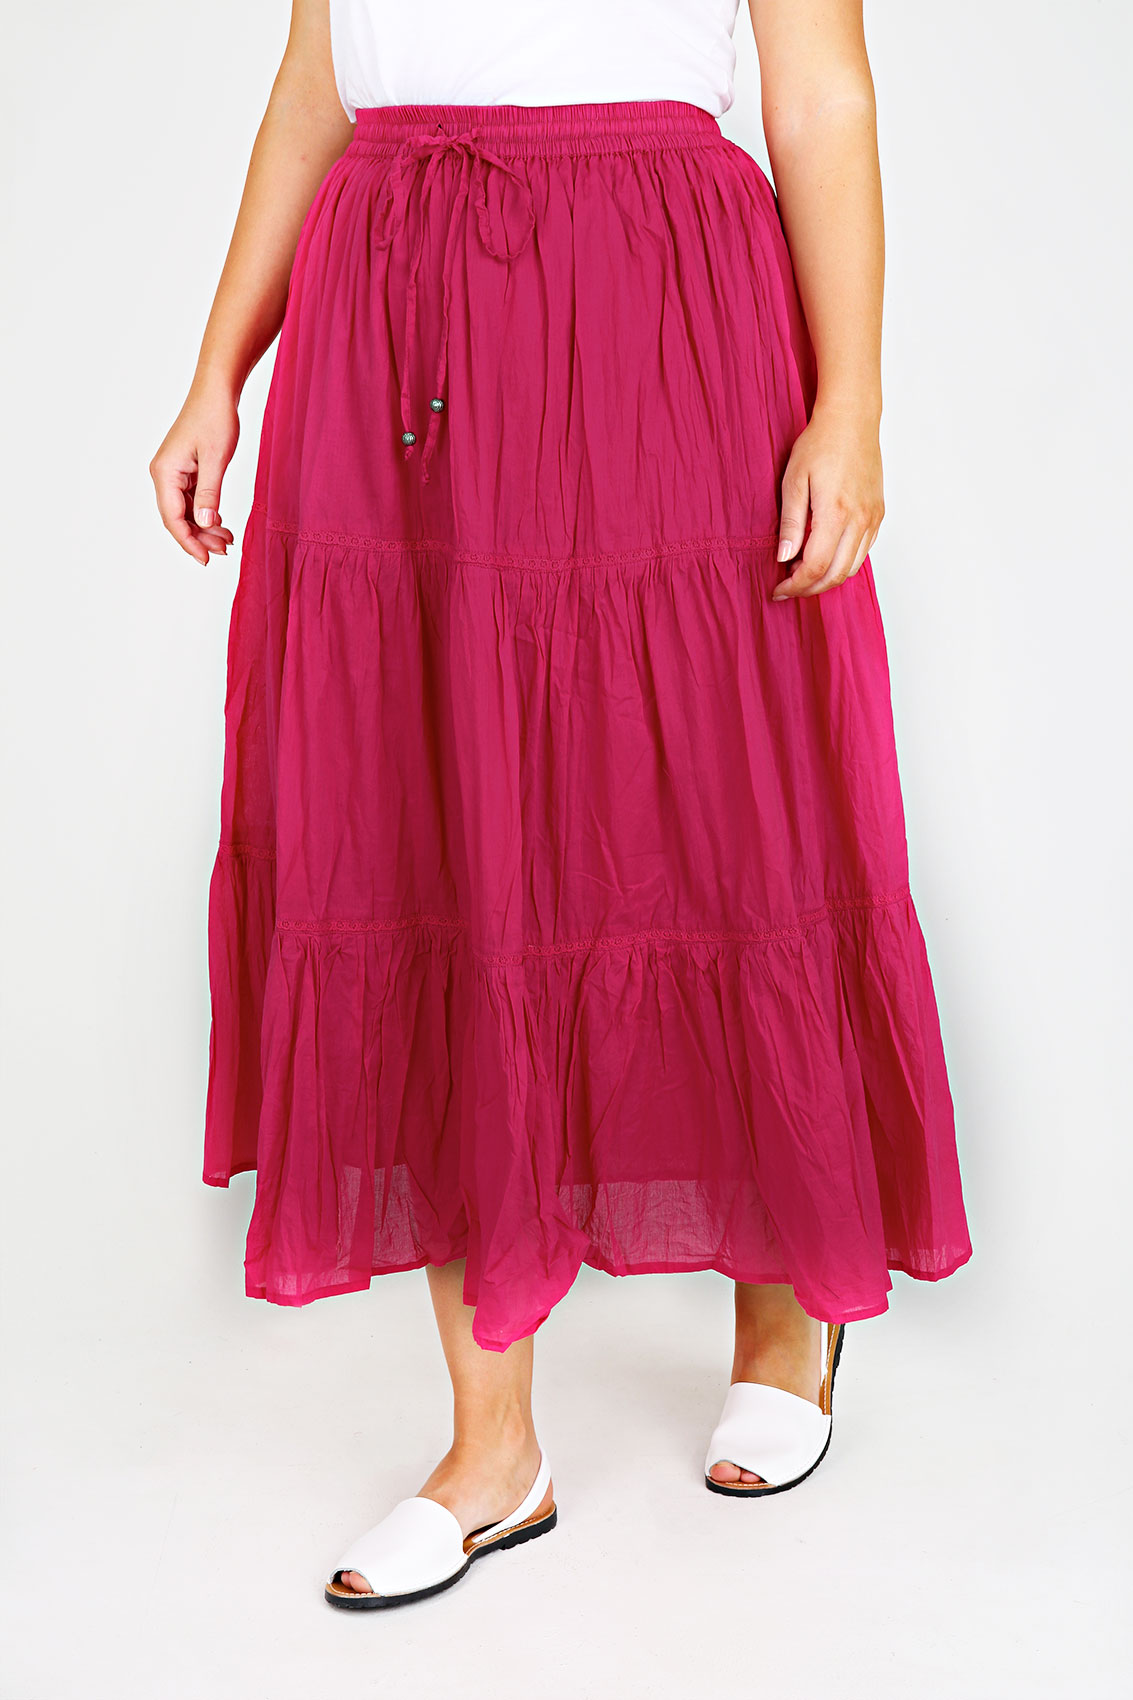 Magenta Cotton Voile Maxi Skirt With Crochet Detail Plus Size 16 to 36